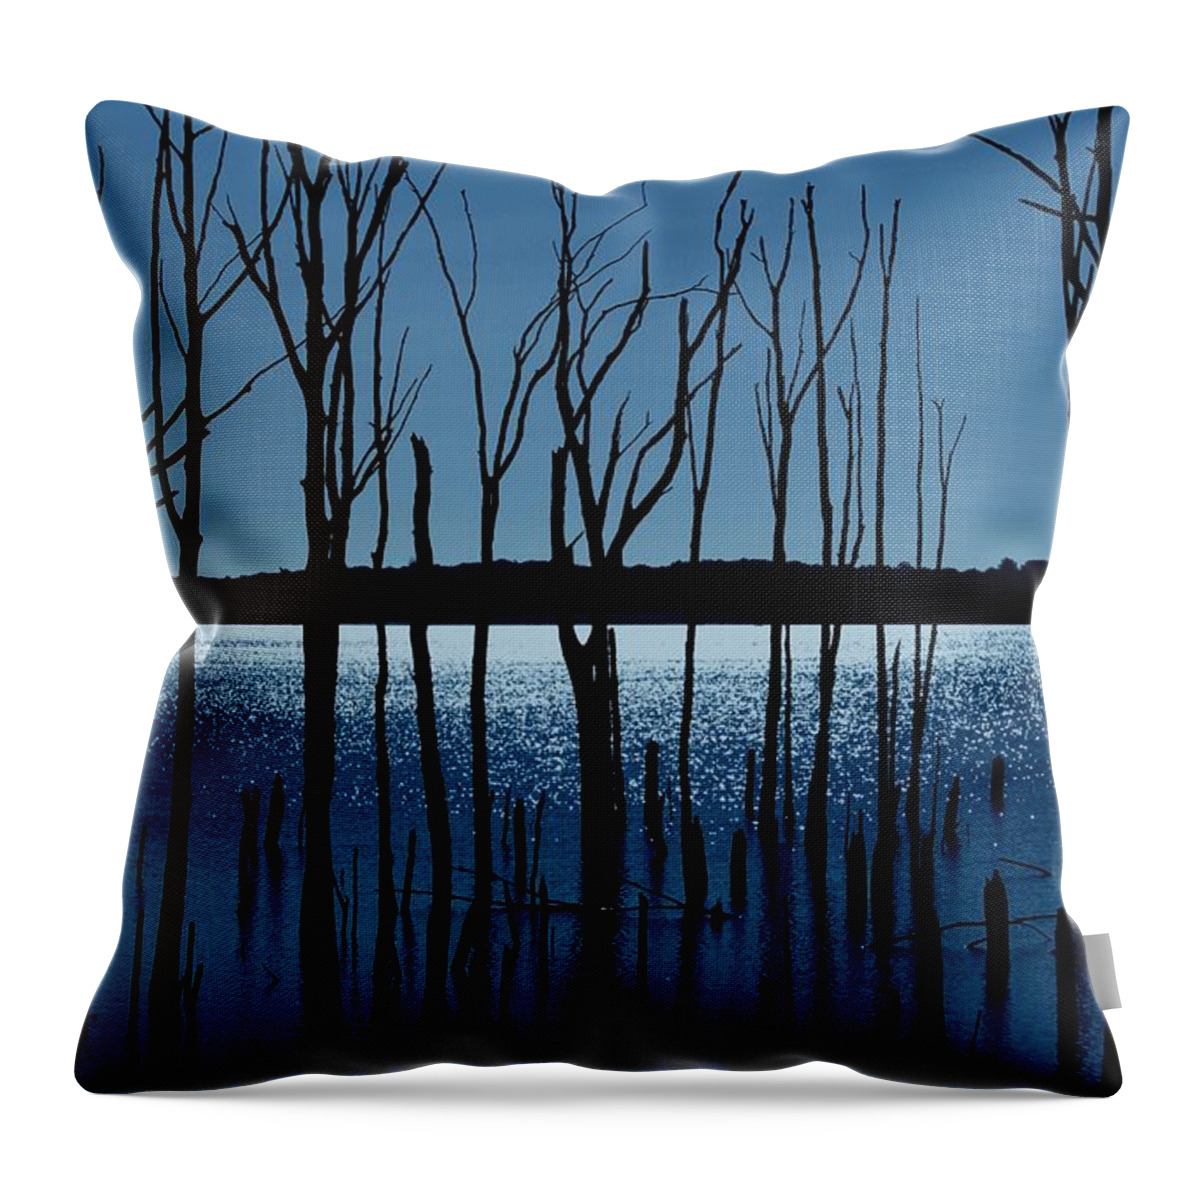 Nature Landscapes Throw Pillow featuring the photograph Blue Reservoir - Manasquan Reservoir by Angie Tirado